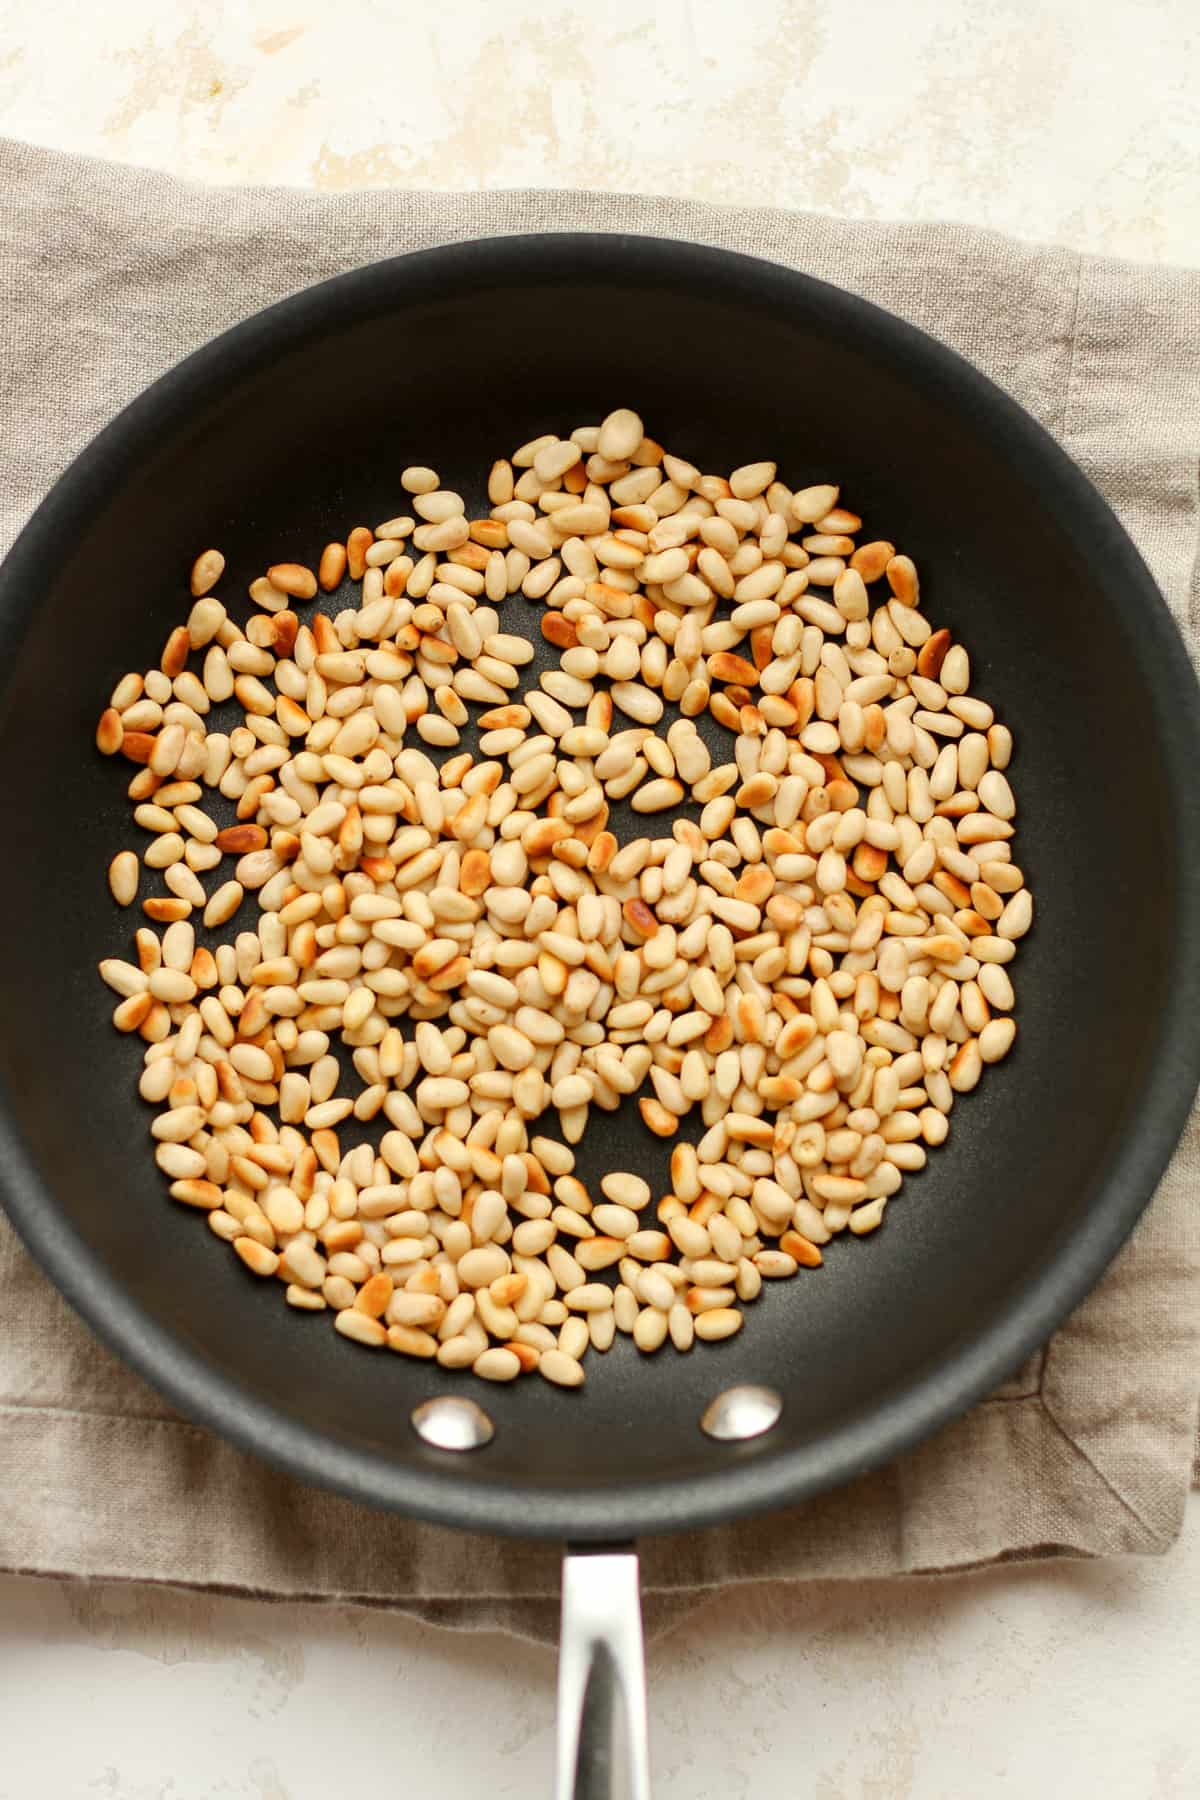 A pan of toasted pine nuts.